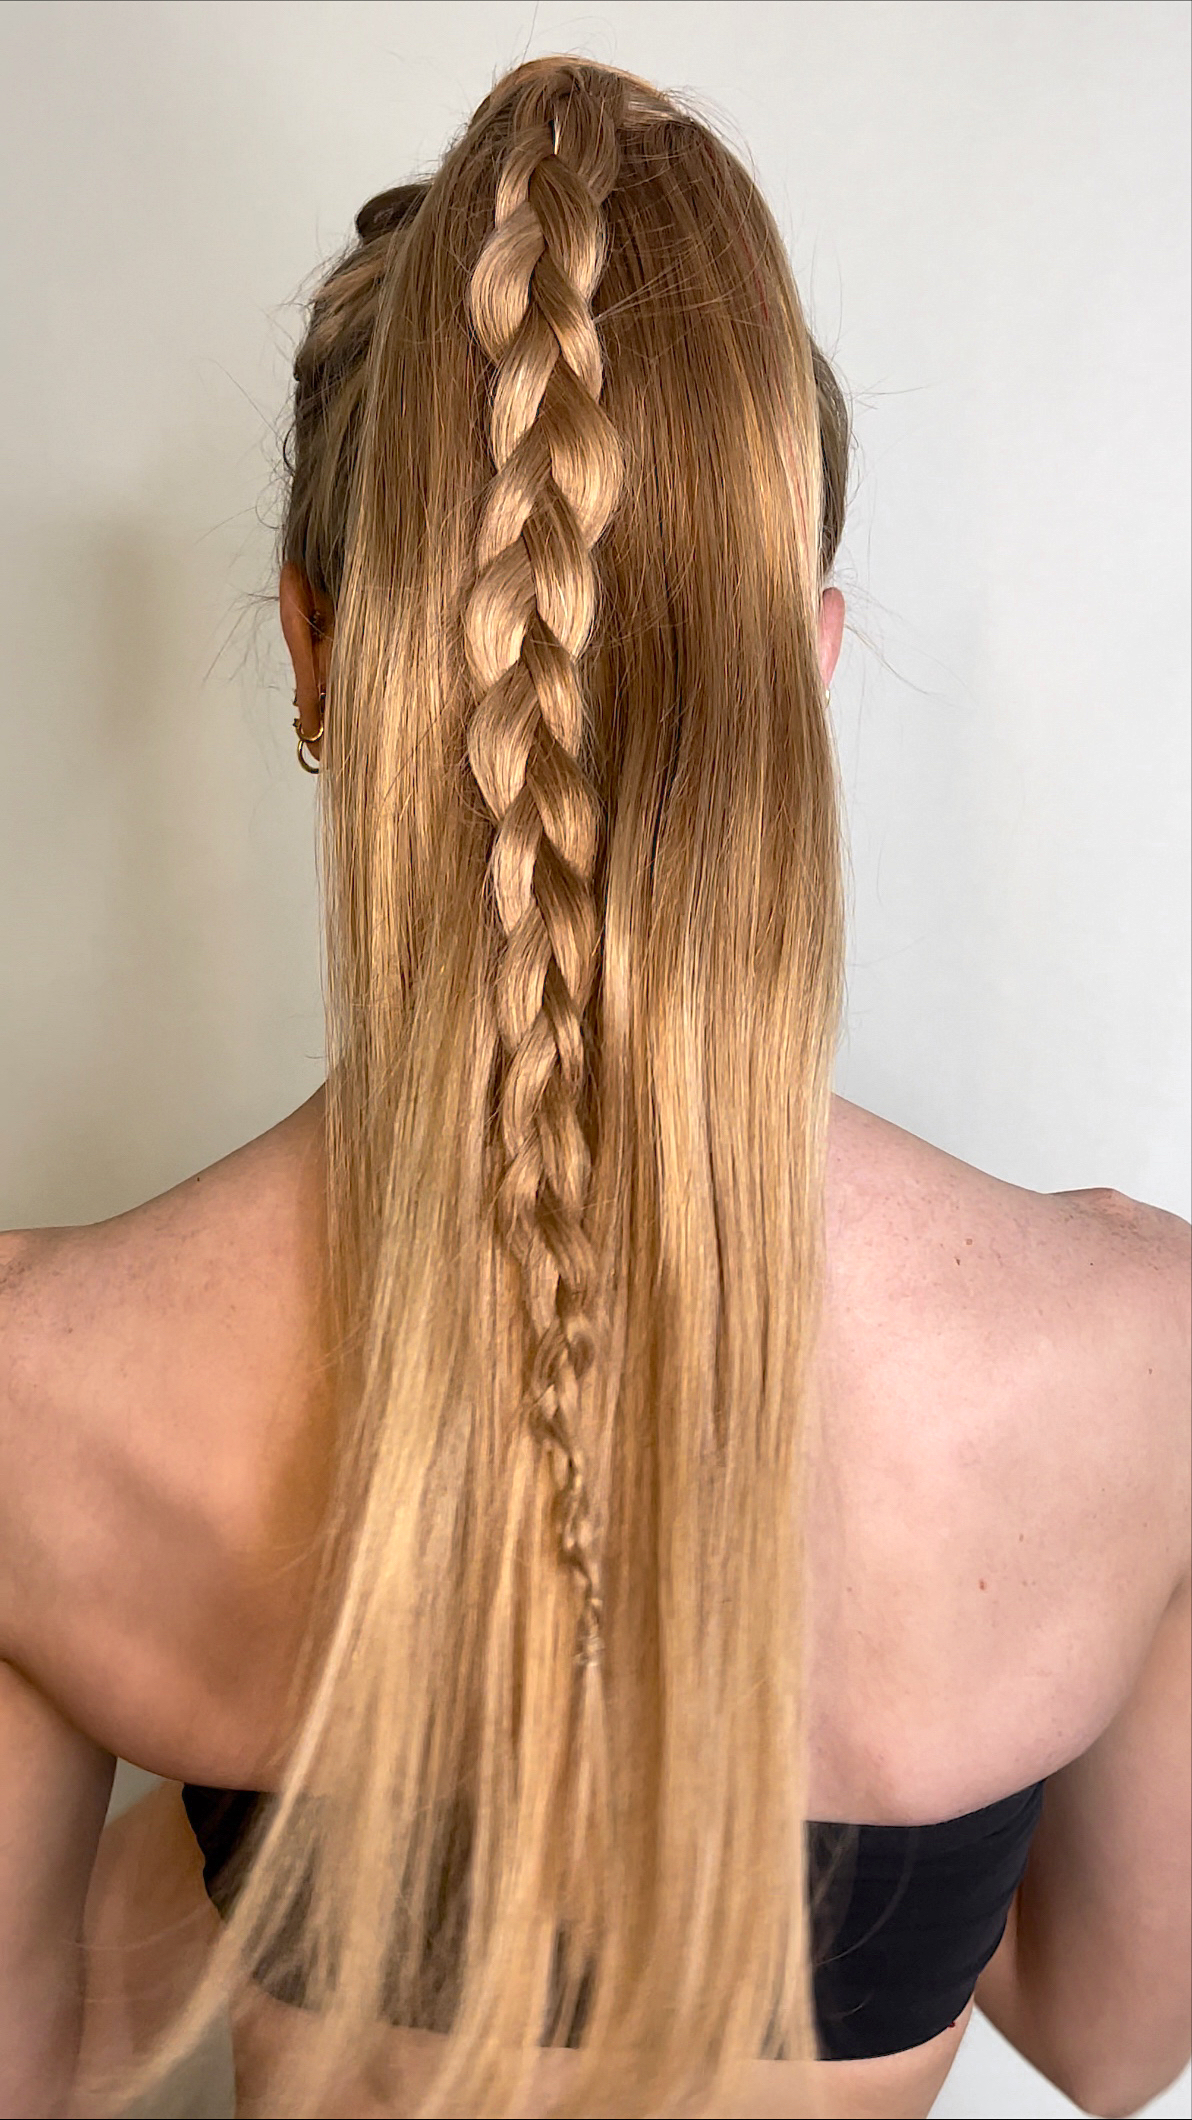 model with strawberry blonde hair in a ponytail with a braid in the center